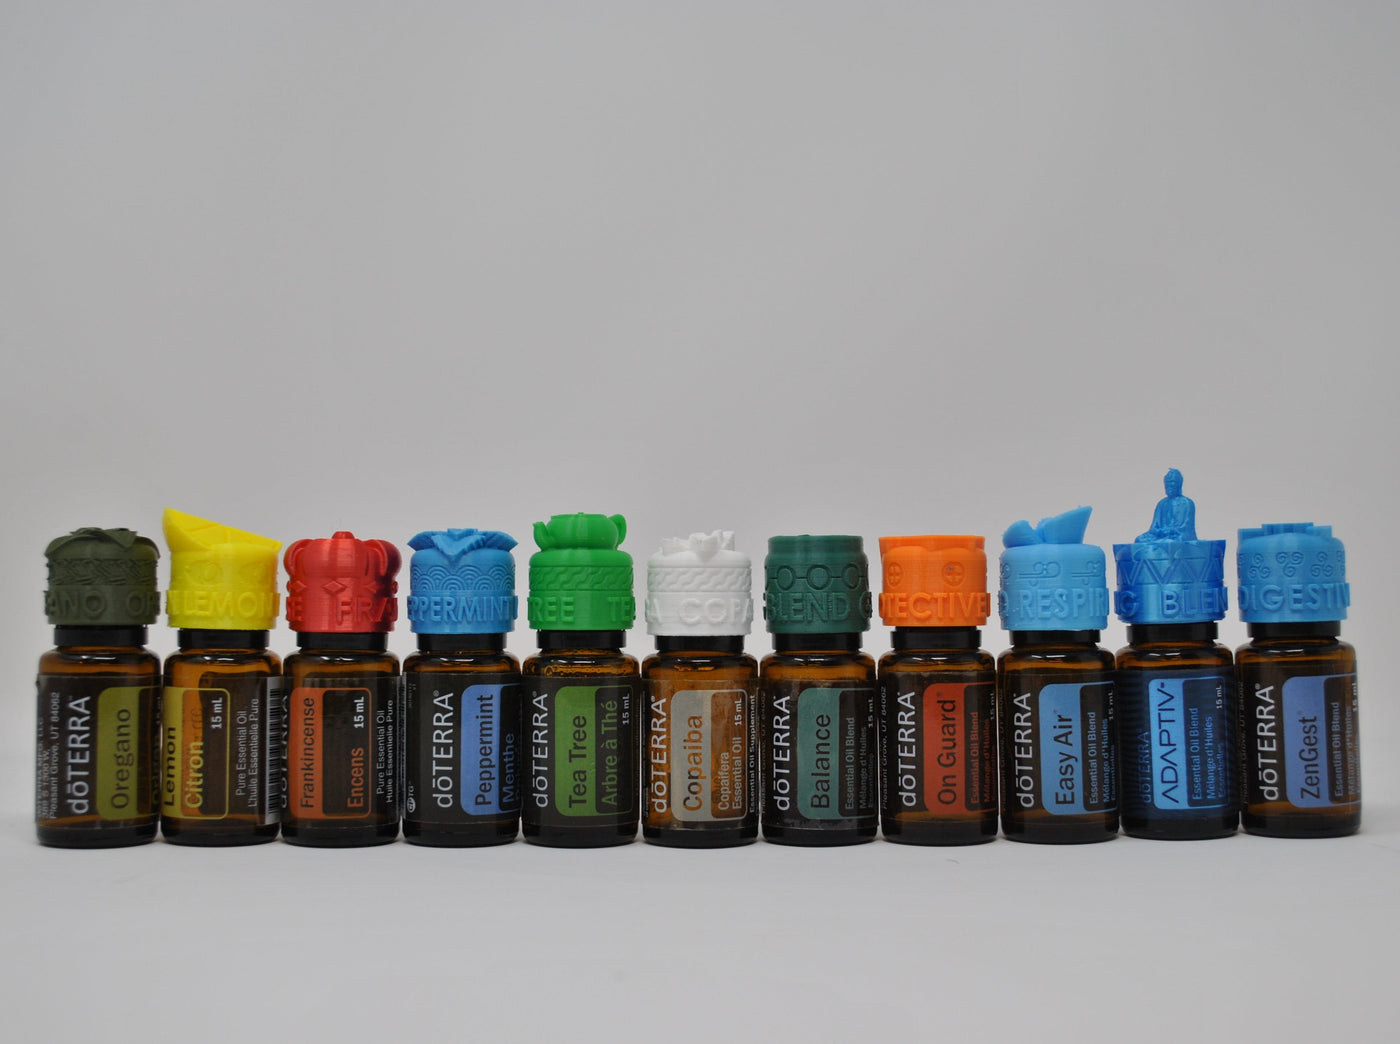 DoToppers - Decorative Tops for Essential Oil Bottles - Oil Life Canada - Canada's Best Essential Oil Supplies